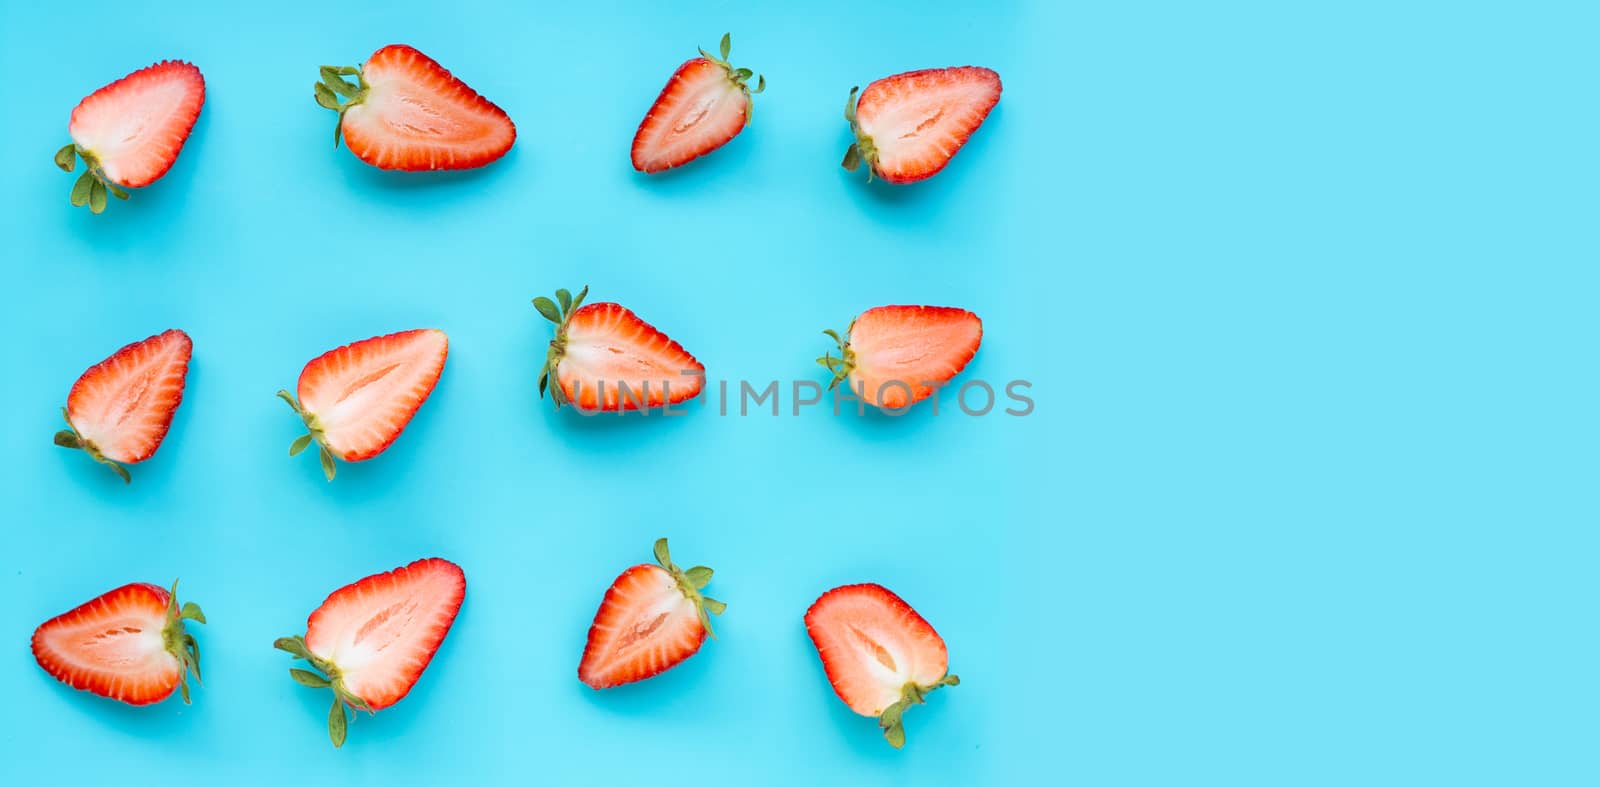 Ripe strawberries on blue background.  by Bowonpat